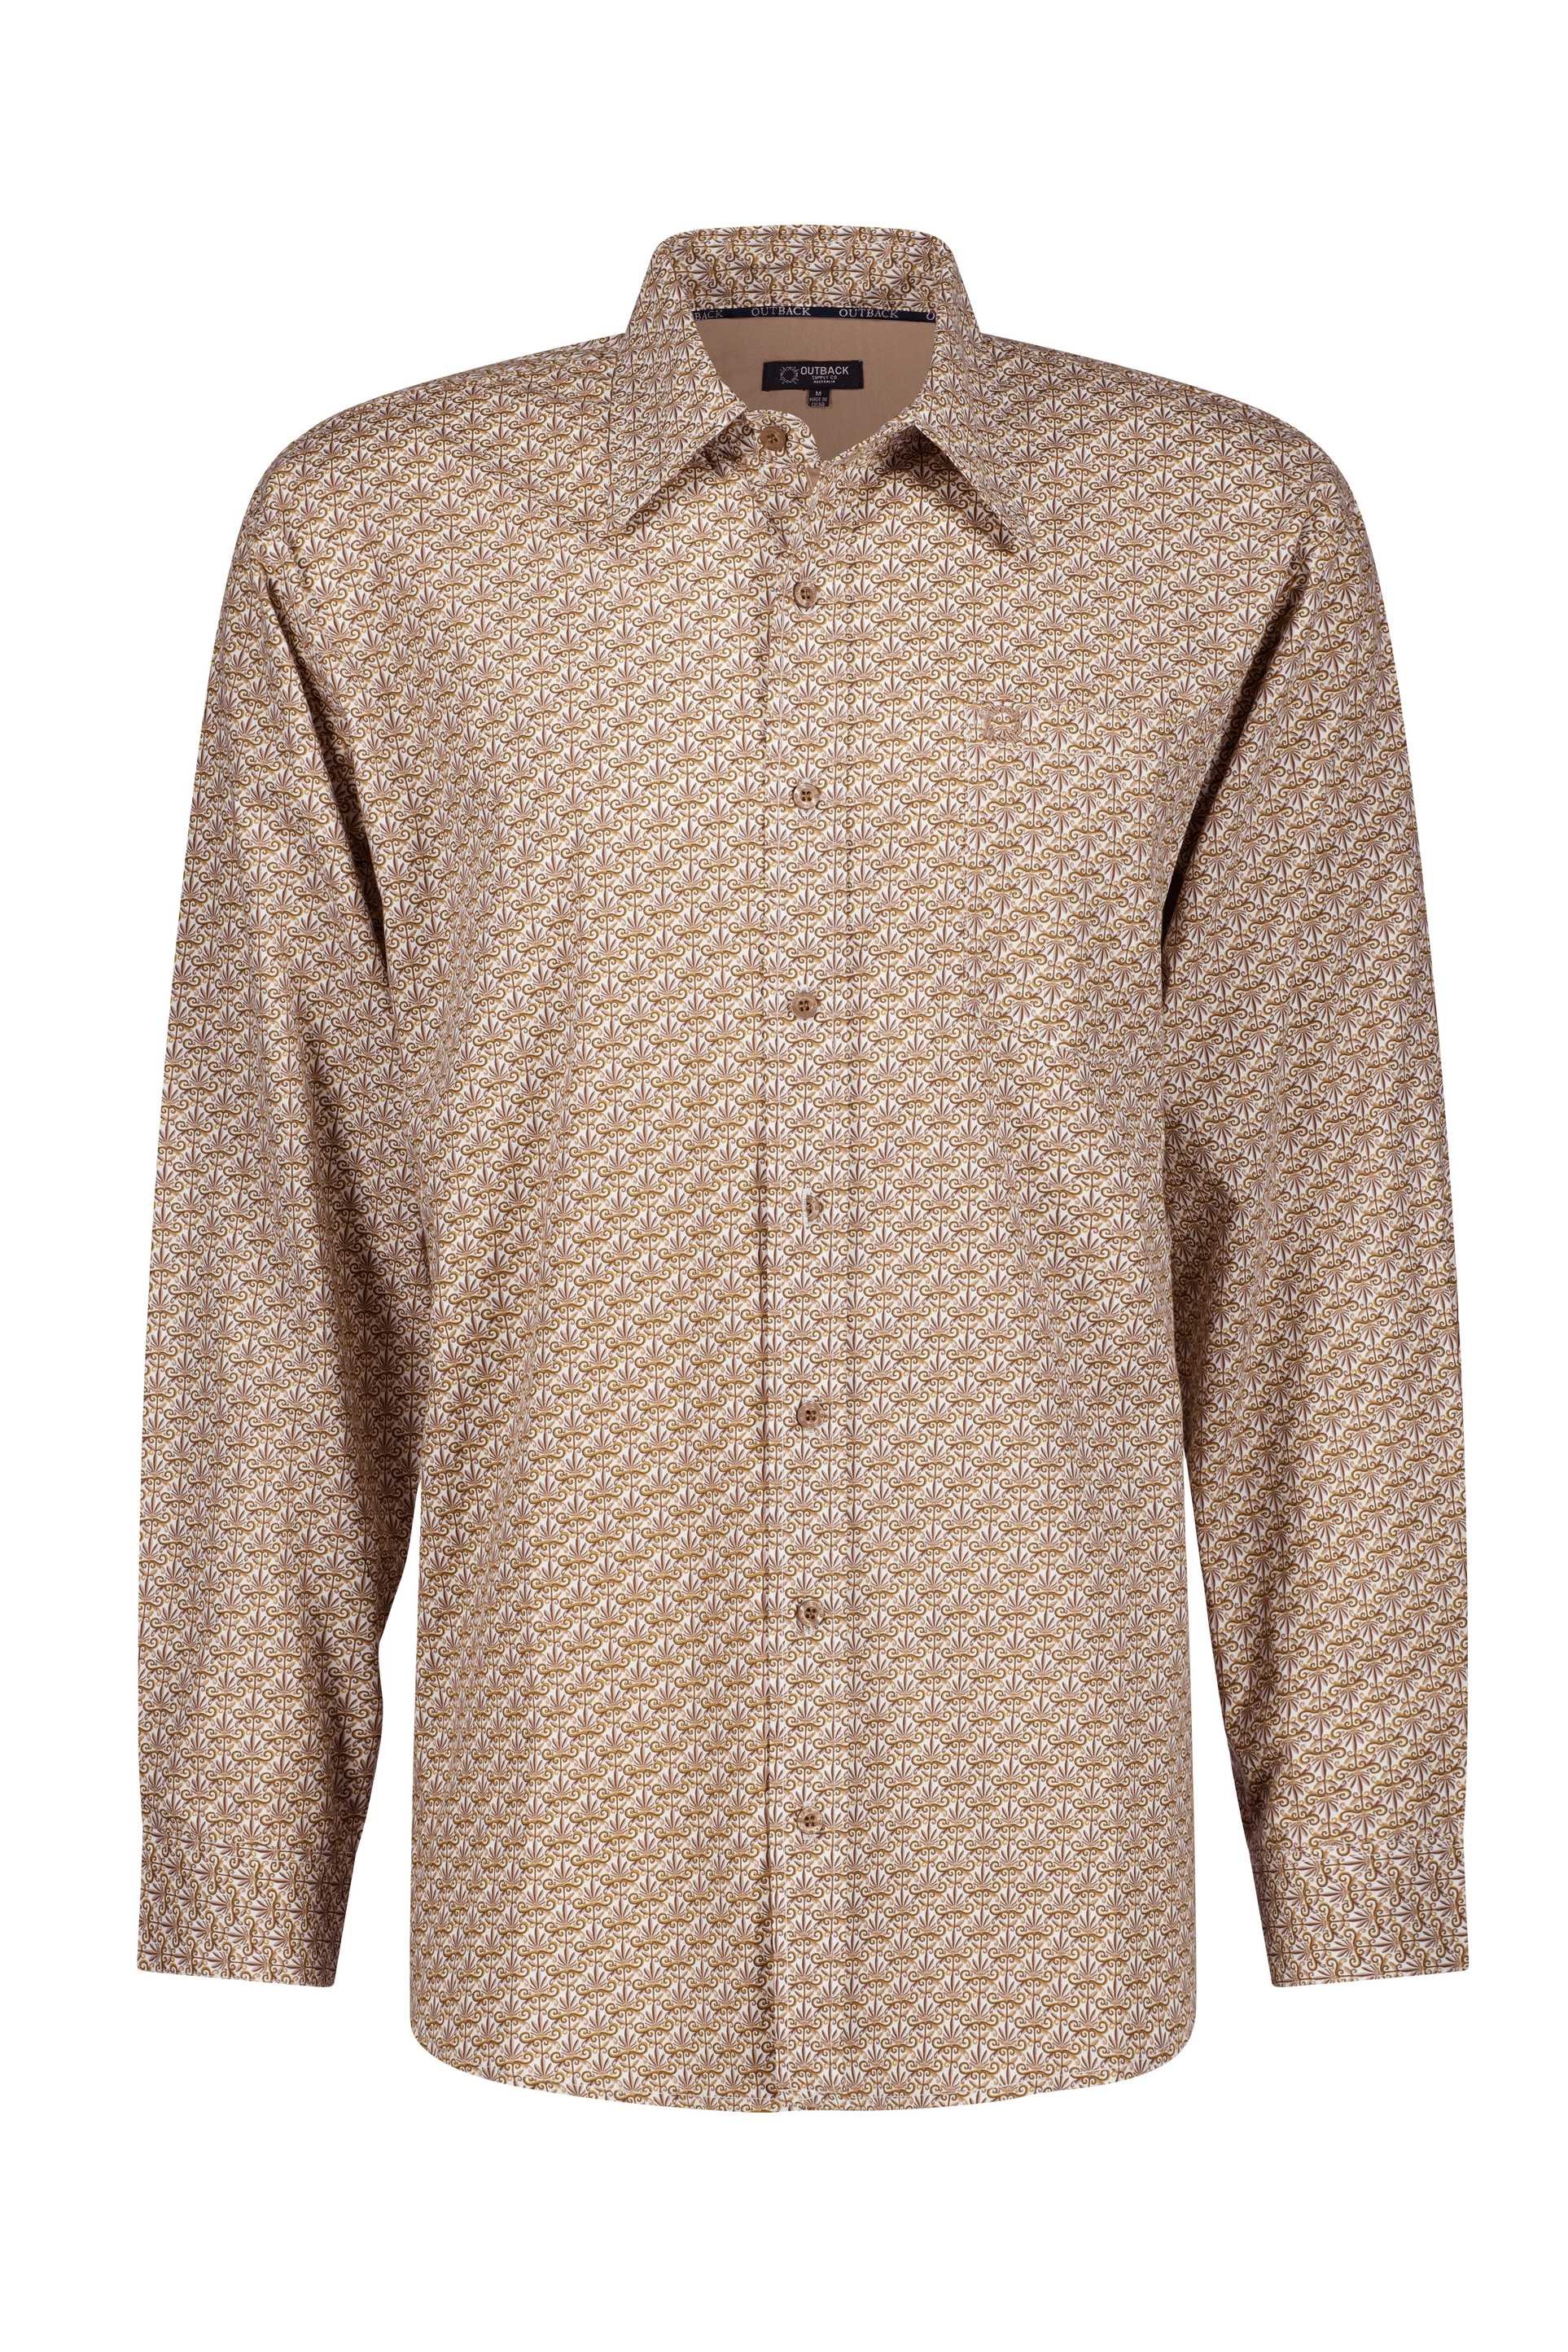 Beige Brown Classic Cotton Shirt Outback Supply Co